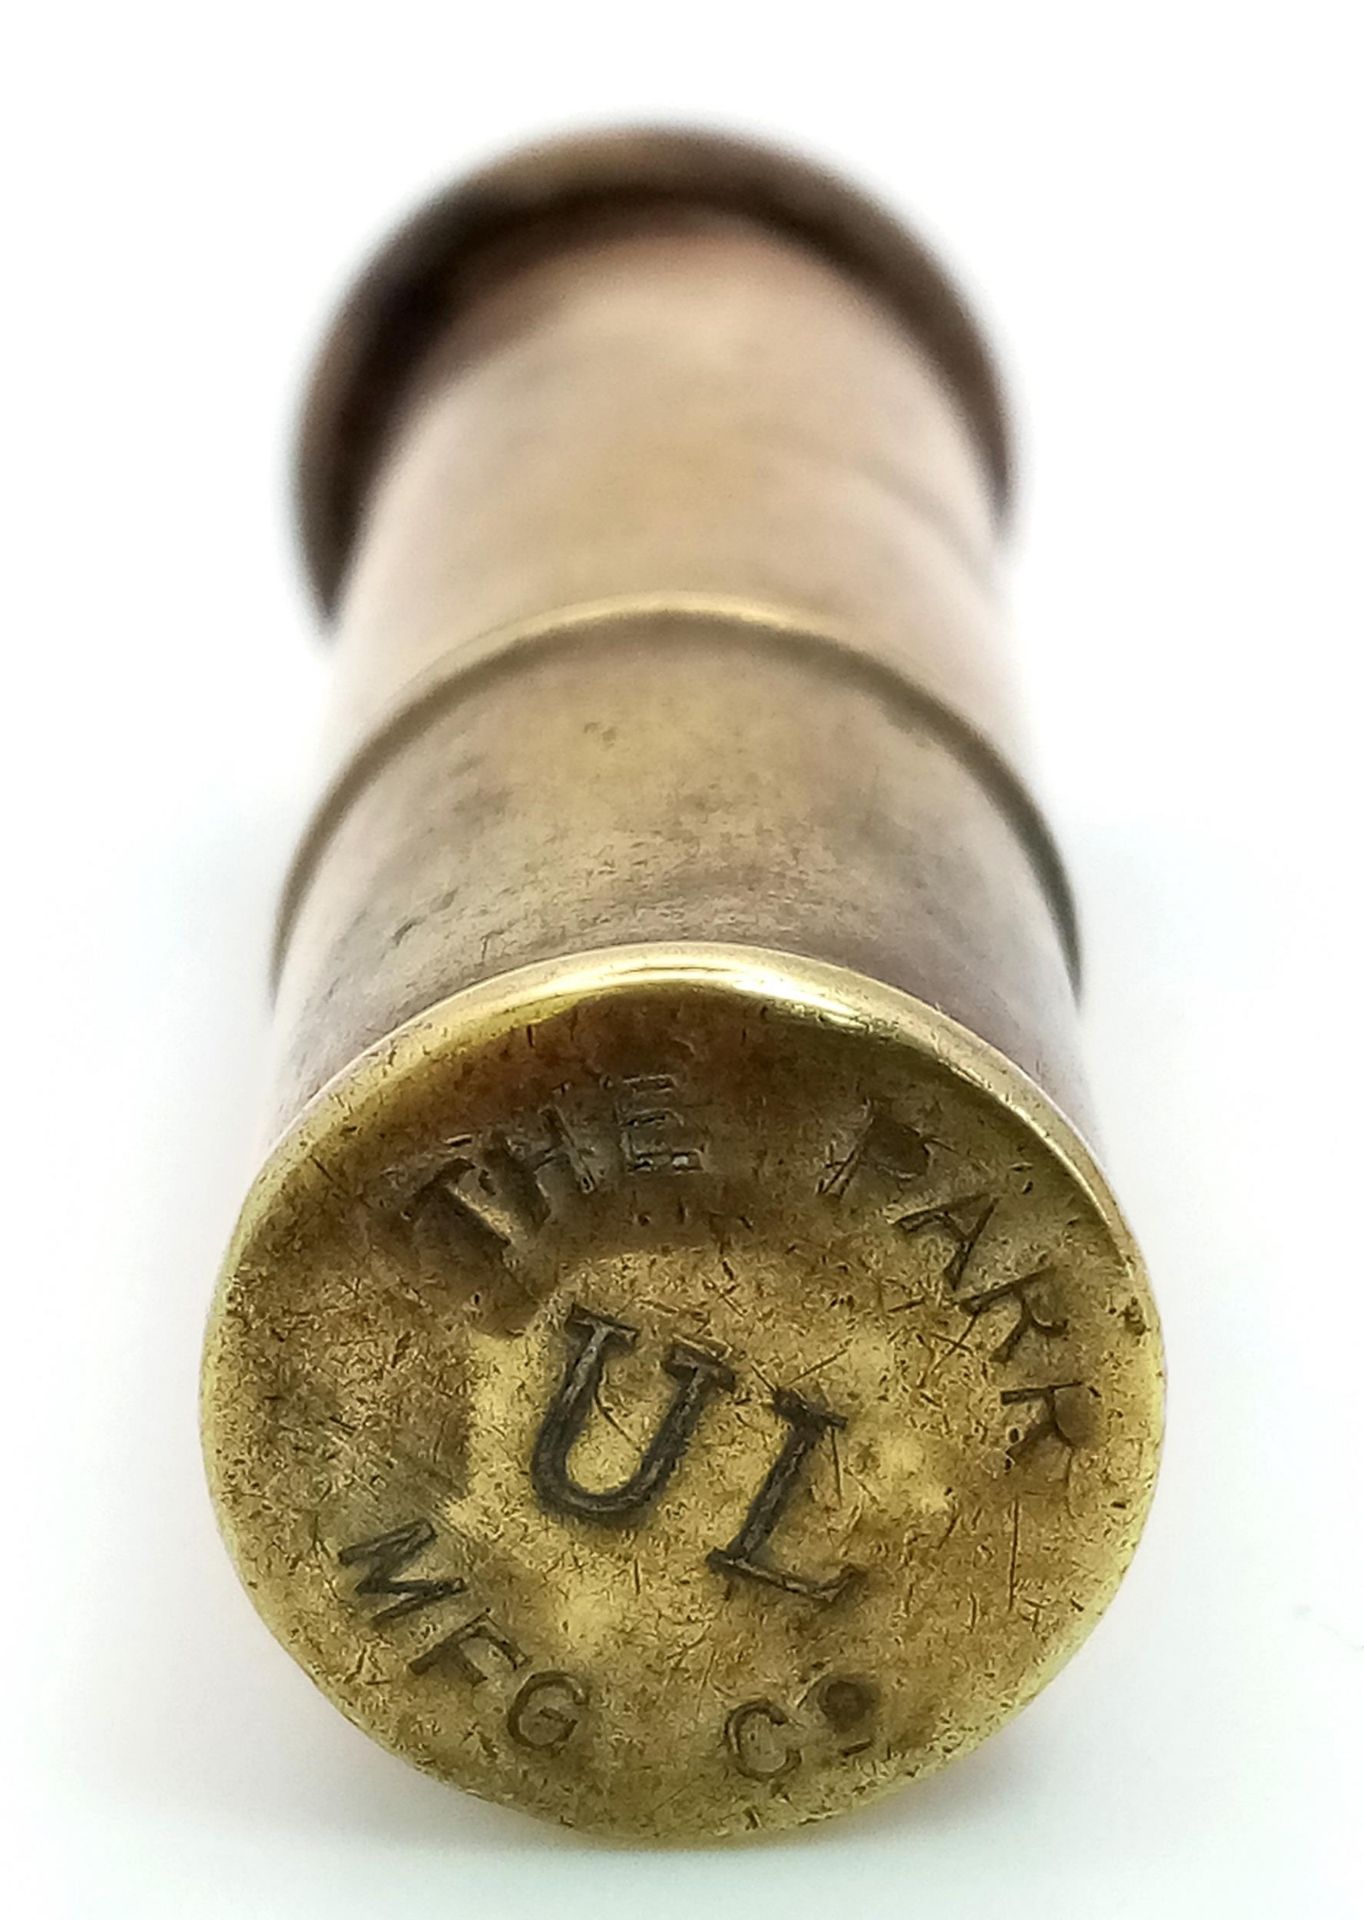 A real rare “Been There” WW1 Trench Art Lighter with a button from the Canadian 27th Battalion - Image 3 of 4